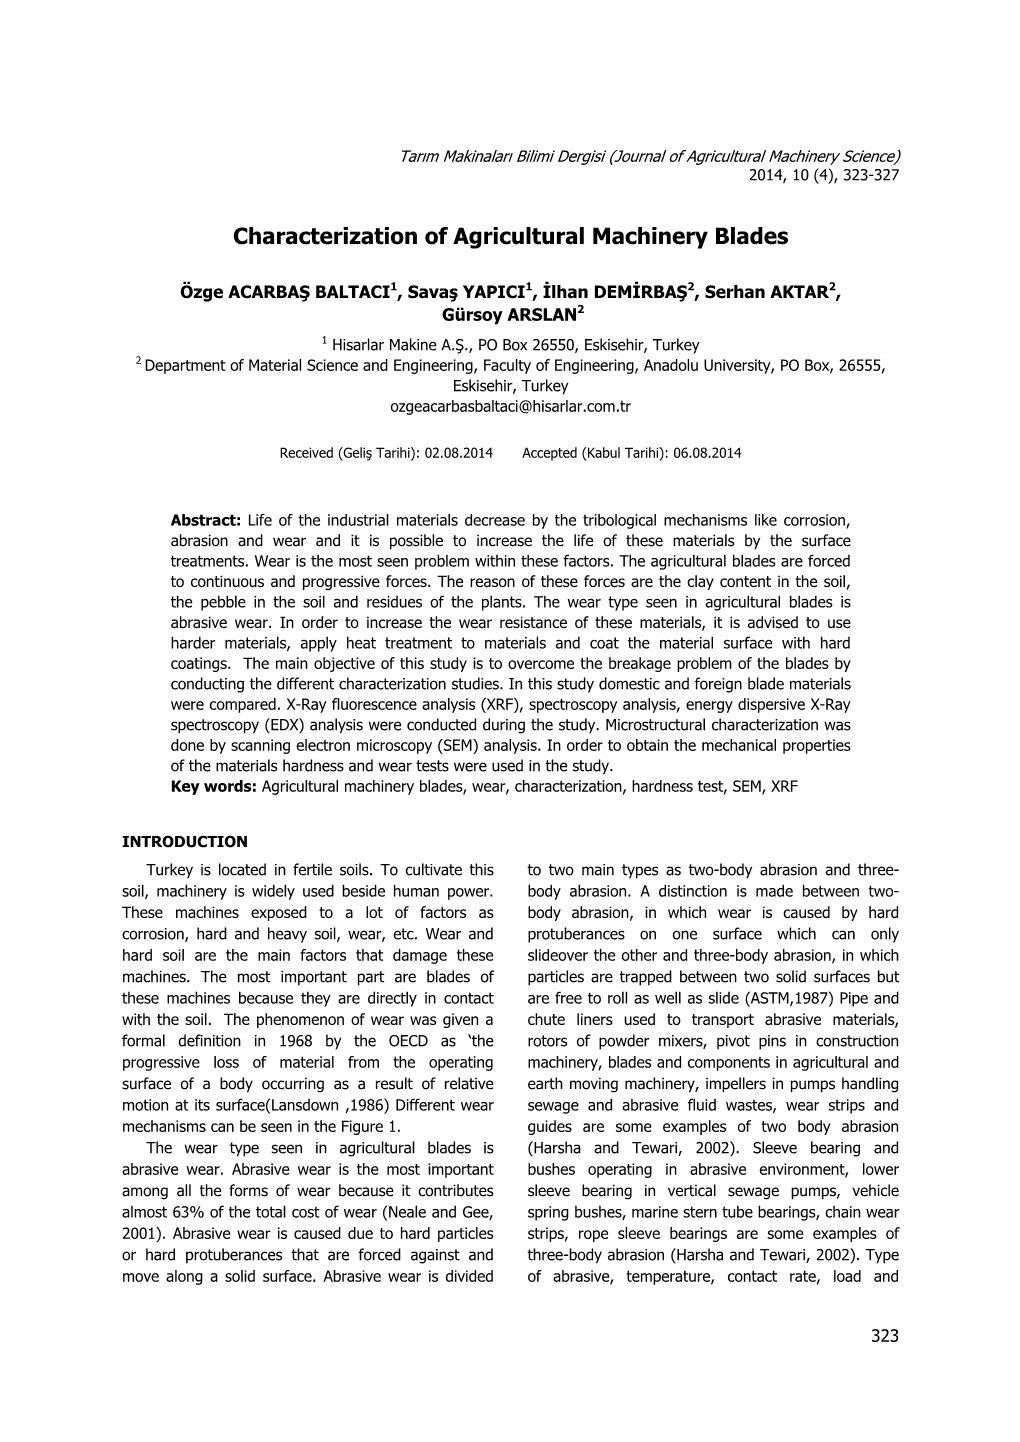 Characterization of Agricultural Machinery Blades